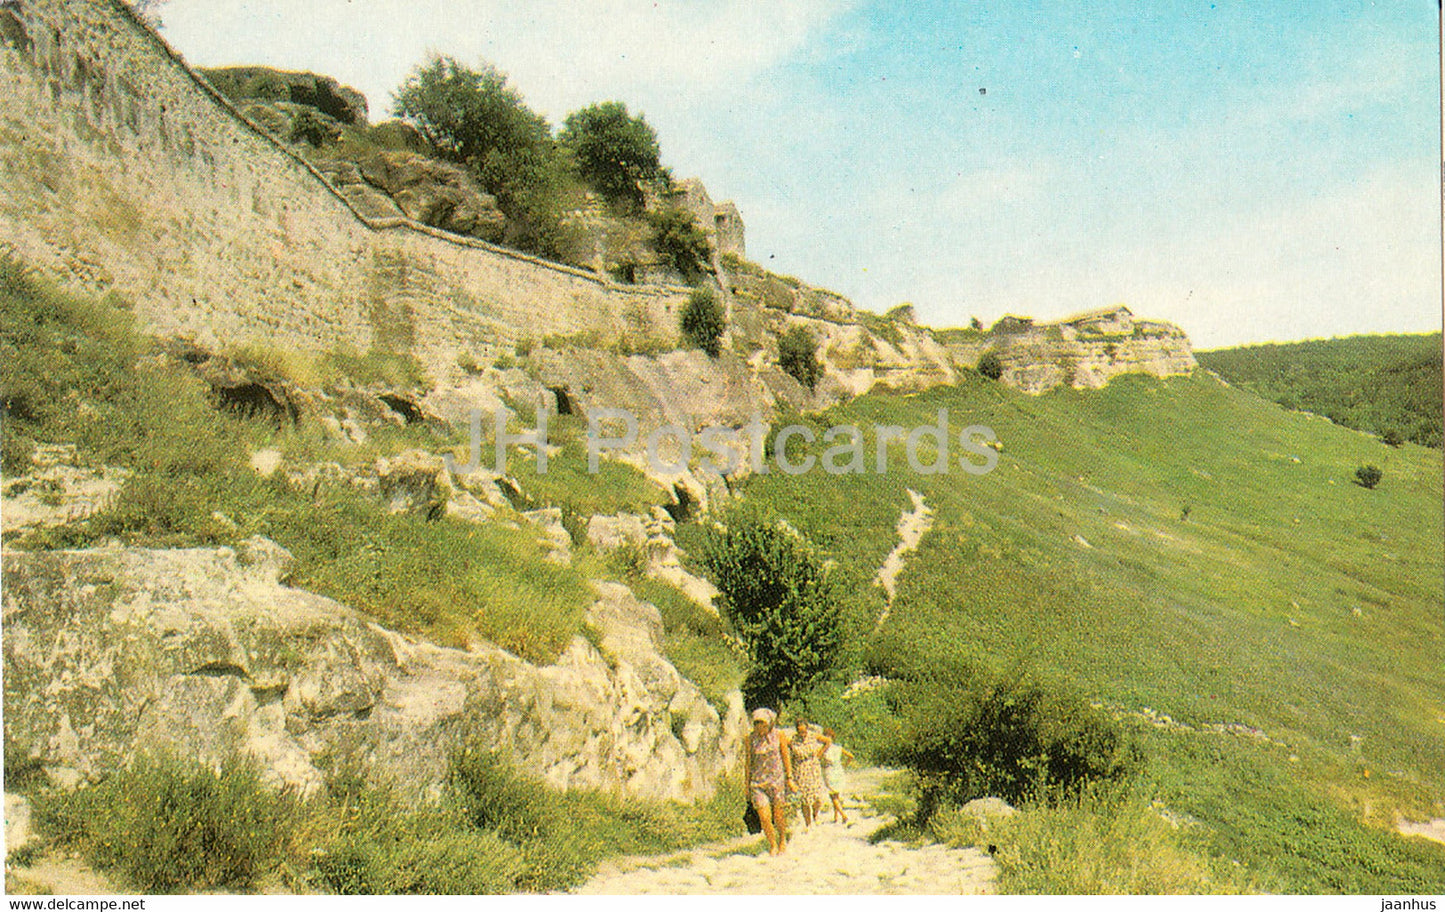 Bakhchisaray Historical Museum - cave town Chufut Kale - defensive wall - 1974 - Ukraine USSR - unused - JH Postcards